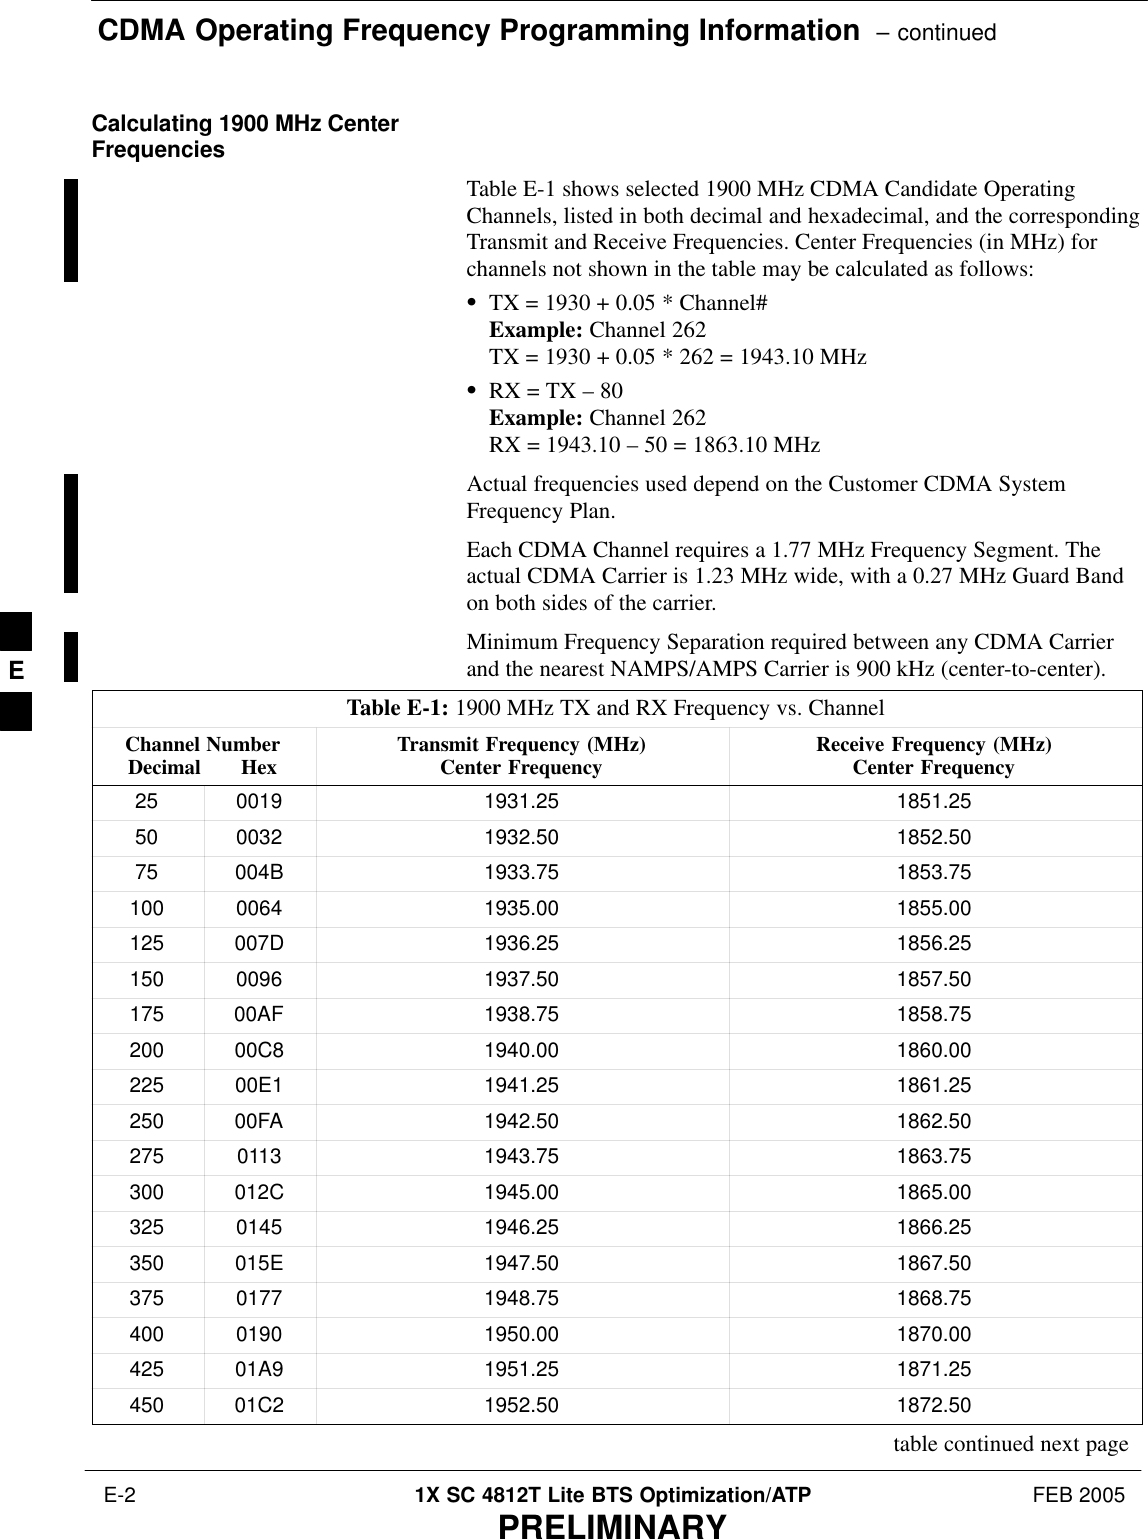 CDMA Operating Frequency Programming Information  – continued E-2 1X SC 4812T Lite BTS Optimization/ATP FEB 2005PRELIMINARYCalculating 1900 MHz CenterFrequenciesTable E-1 shows selected 1900 MHz CDMA Candidate OperatingChannels, listed in both decimal and hexadecimal, and the correspondingTransmit and Receive Frequencies. Center Frequencies (in MHz) forchannels not shown in the table may be calculated as follows:STX = 1930 + 0.05 * Channel#Example: Channel 262TX = 1930 + 0.05 * 262 = 1943.10 MHzSRX = TX – 80Example: Channel 262RX = 1943.10 – 50 = 1863.10 MHzActual frequencies used depend on the Customer CDMA SystemFrequency Plan.Each CDMA Channel requires a 1.77 MHz Frequency Segment. Theactual CDMA Carrier is 1.23 MHz wide, with a 0.27 MHz Guard Bandon both sides of the carrier.Minimum Frequency Separation required between any CDMA Carrierand the nearest NAMPS/AMPS Carrier is 900 kHz (center-to-center).Table E-1: 1900 MHz TX and RX Frequency vs. ChannelChannel NumberDecimal       Hex Transmit Frequency (MHz)Center Frequency Receive Frequency (MHz)Center Frequency25 0019 1931.25 1851.2550 0032 1932.50 1852.5075 004B 1933.75 1853.75100 0064 1935.00 1855.00125 007D 1936.25 1856.25150 0096 1937.50 1857.50175 00AF 1938.75 1858.75200 00C8 1940.00 1860.00225 00E1 1941.25 1861.25250 00FA 1942.50 1862.50275 0113 1943.75 1863.75300 012C 1945.00 1865.00325 0145 1946.25 1866.25350 015E 1947.50 1867.50375 0177 1948.75 1868.75400 0190 1950.00 1870.00425 01A9 1951.25 1871.25450 01C2 1952.50 1872.50table continued next pageE